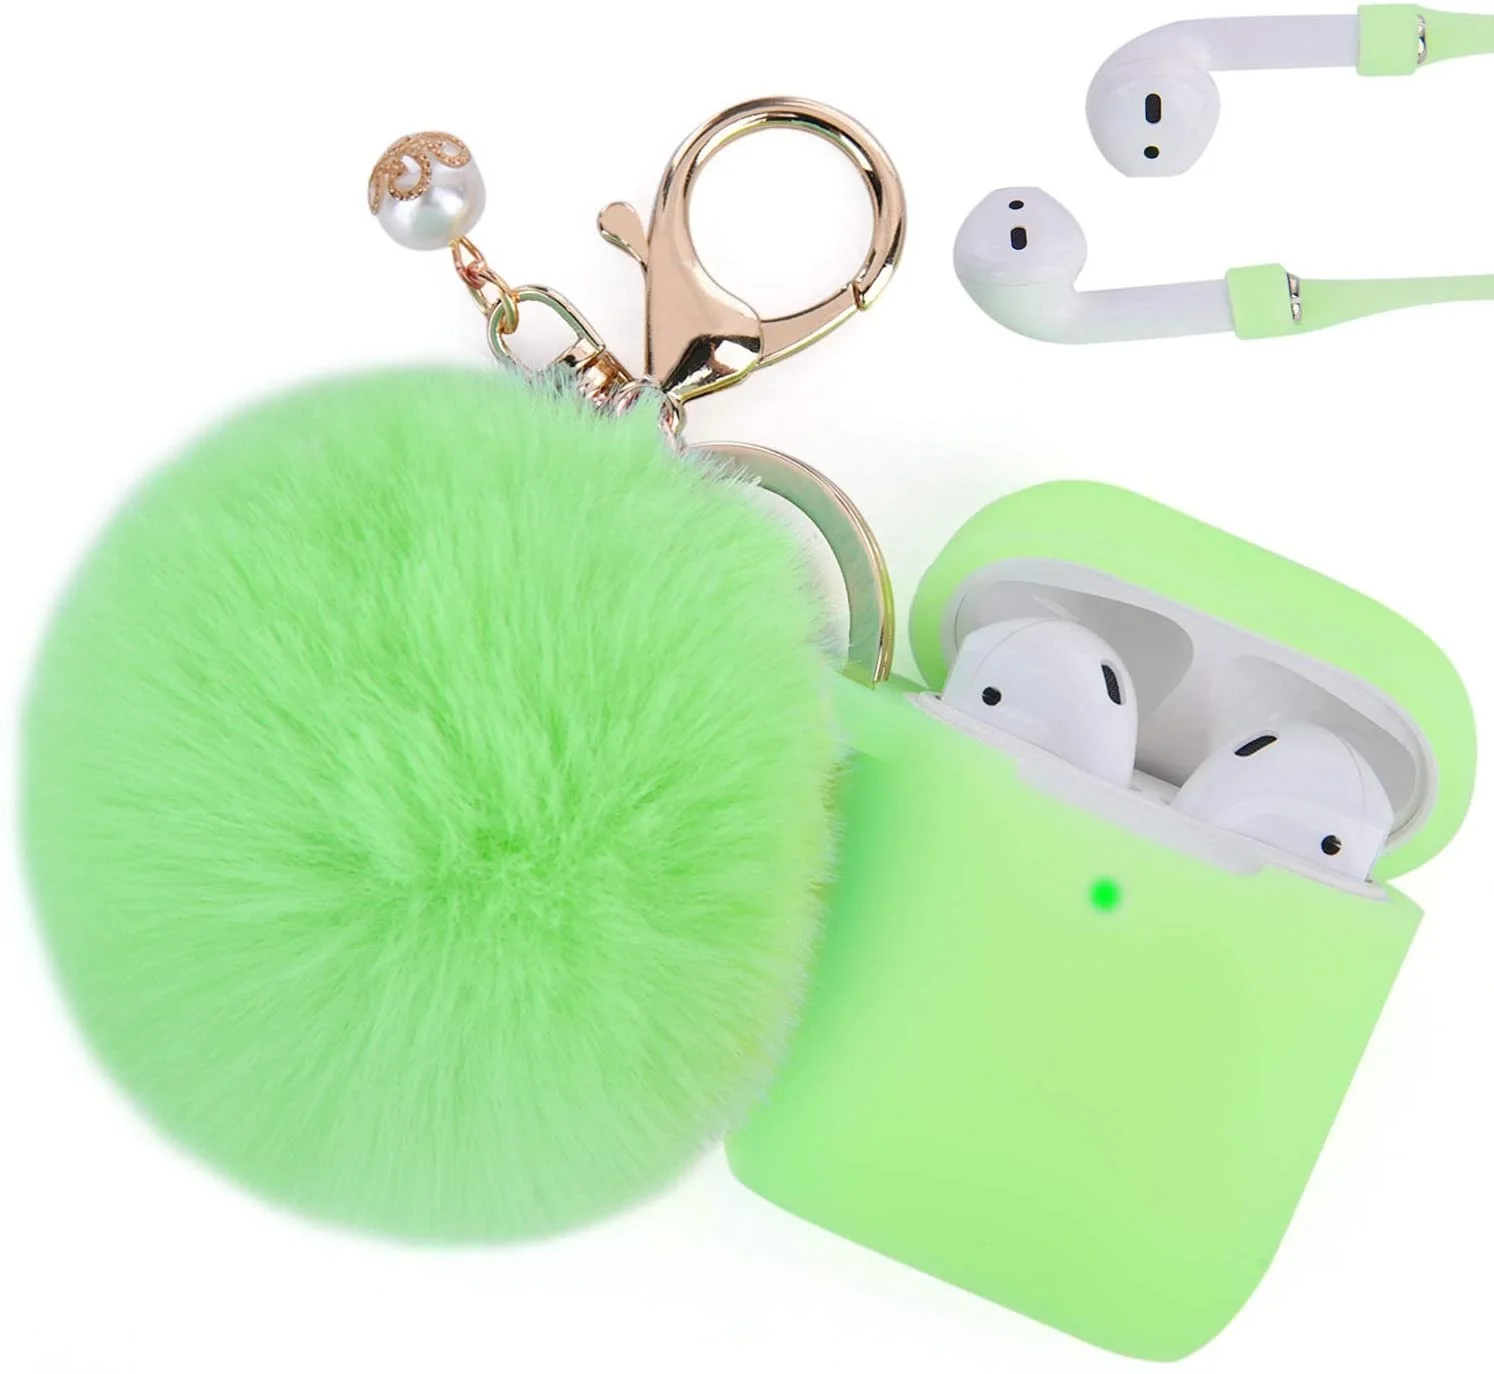 

2020 Luxury Cute Silicone Cover Skin Case for Airpod Case with Fluffy Fur Ball Pompom Pearl Keychain Strap for Apple Airpod 2 1, 32 colors, it could be customized